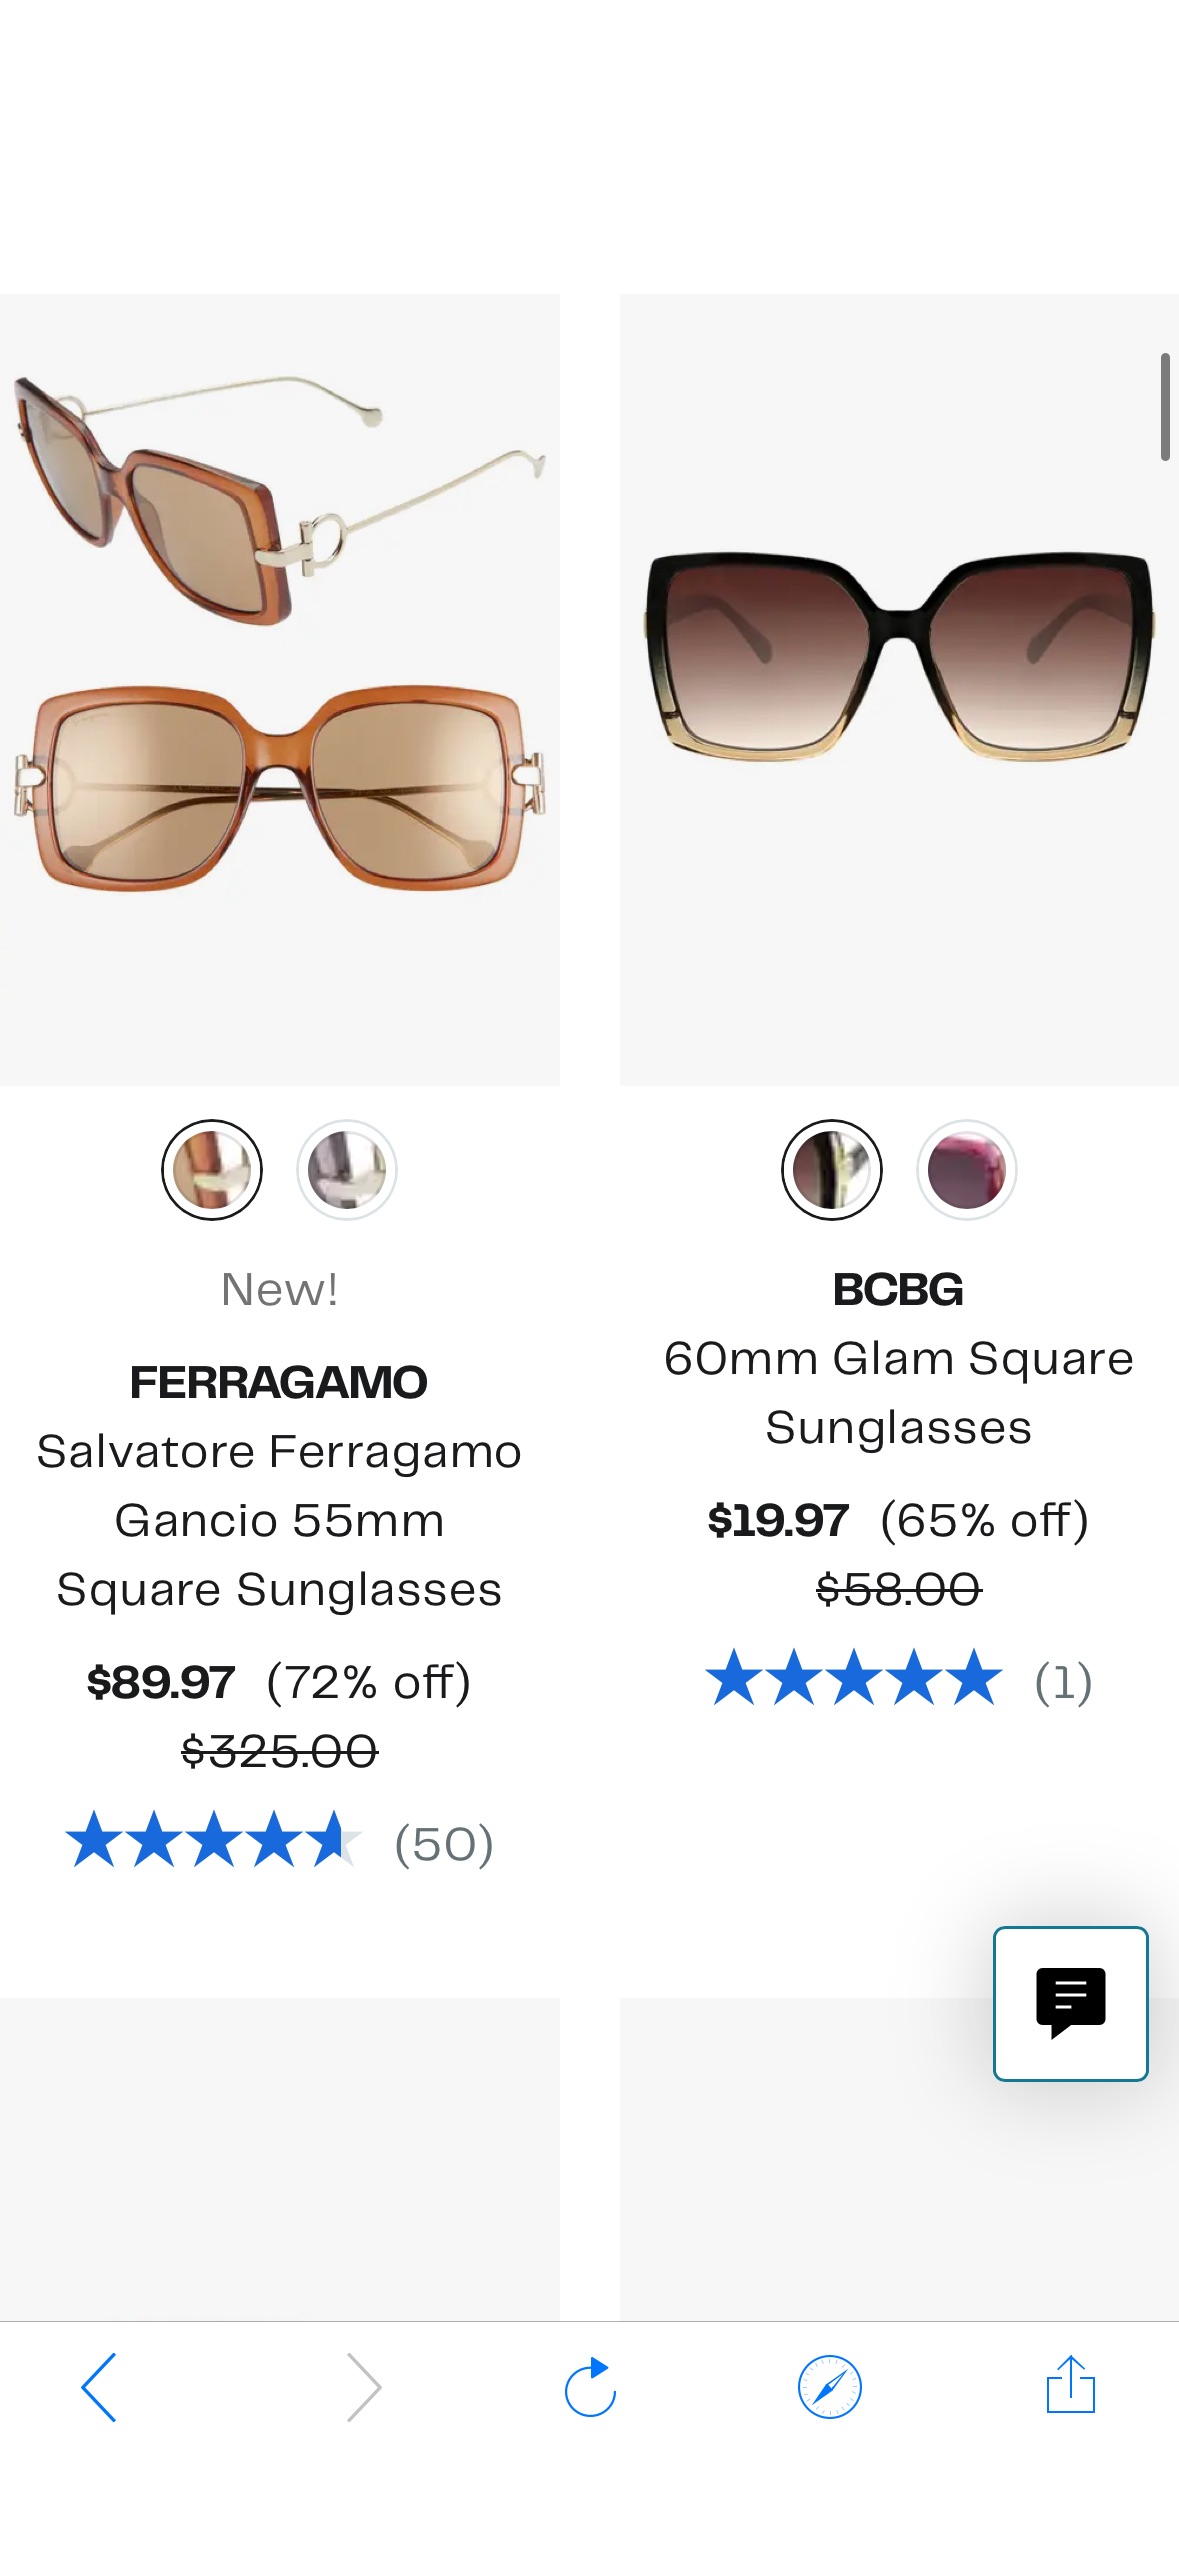 Sunglasses Sale at Nordstrom Rack! Up to 79% Off Marc Jacobs, Tom Ford, Ray-Ban & More